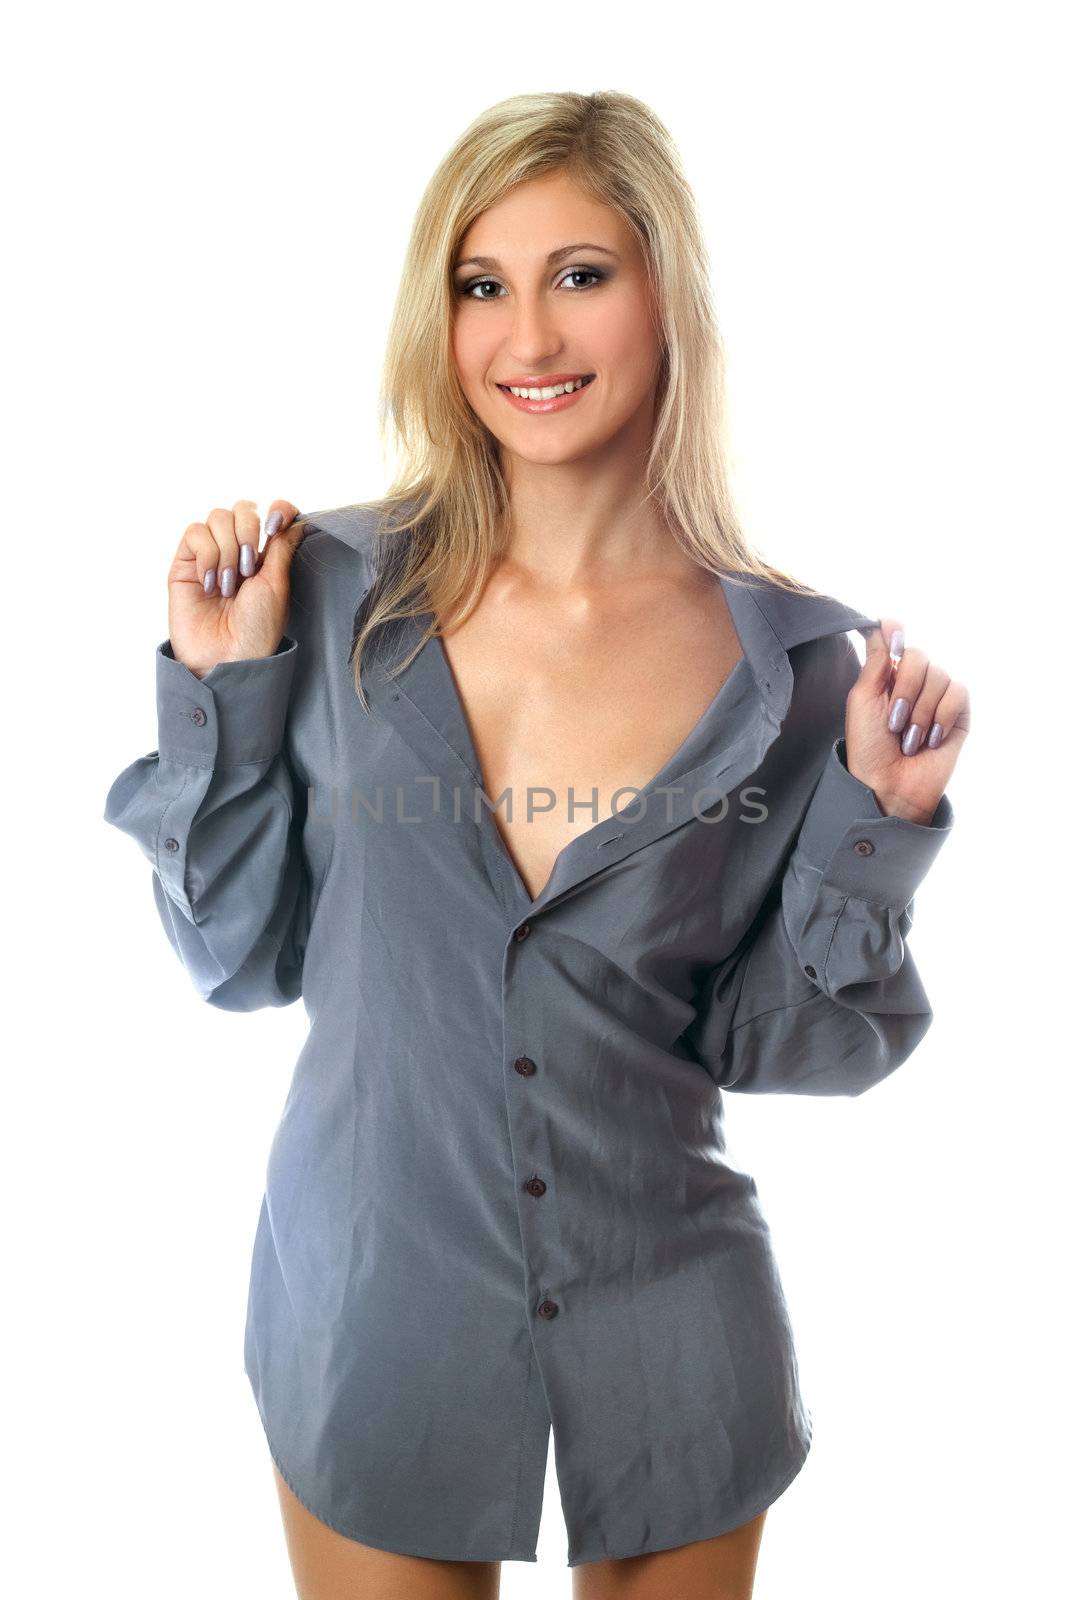 Portrait of playful young woman in man's shirts